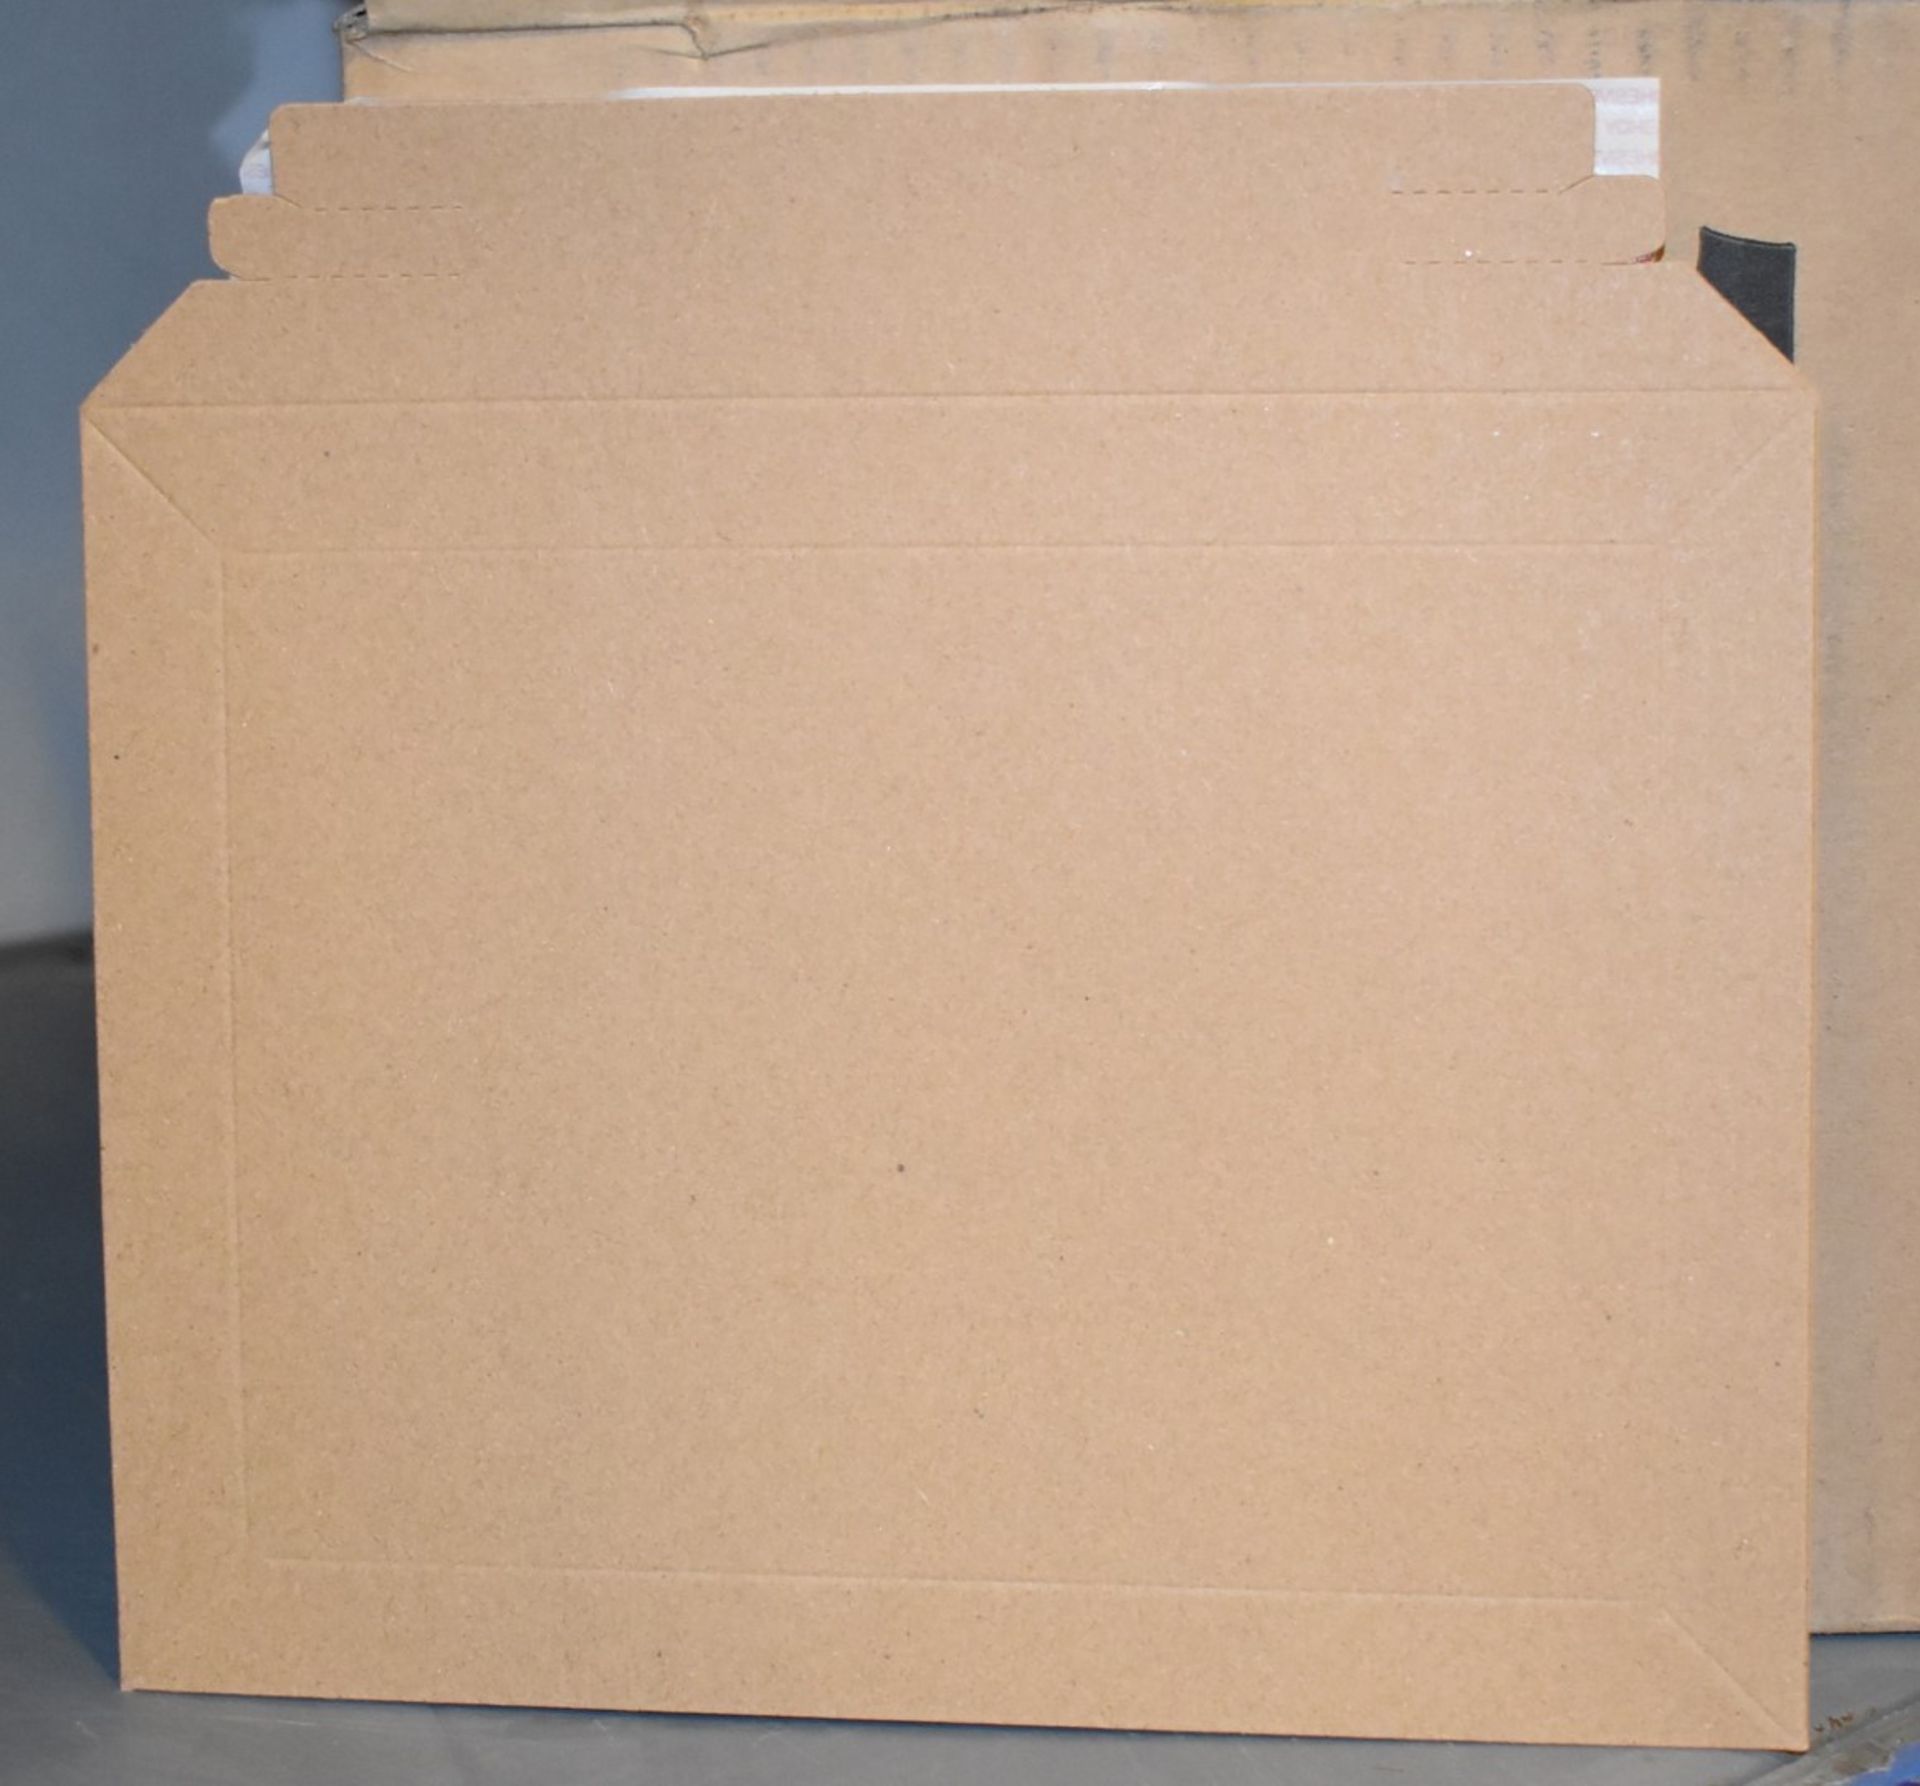 200 x Capacity Book Mailer Cardboard Envelopes - Size: 140 x 140 x 195mm - Includes 2 x Boxes of 100 - Image 6 of 6